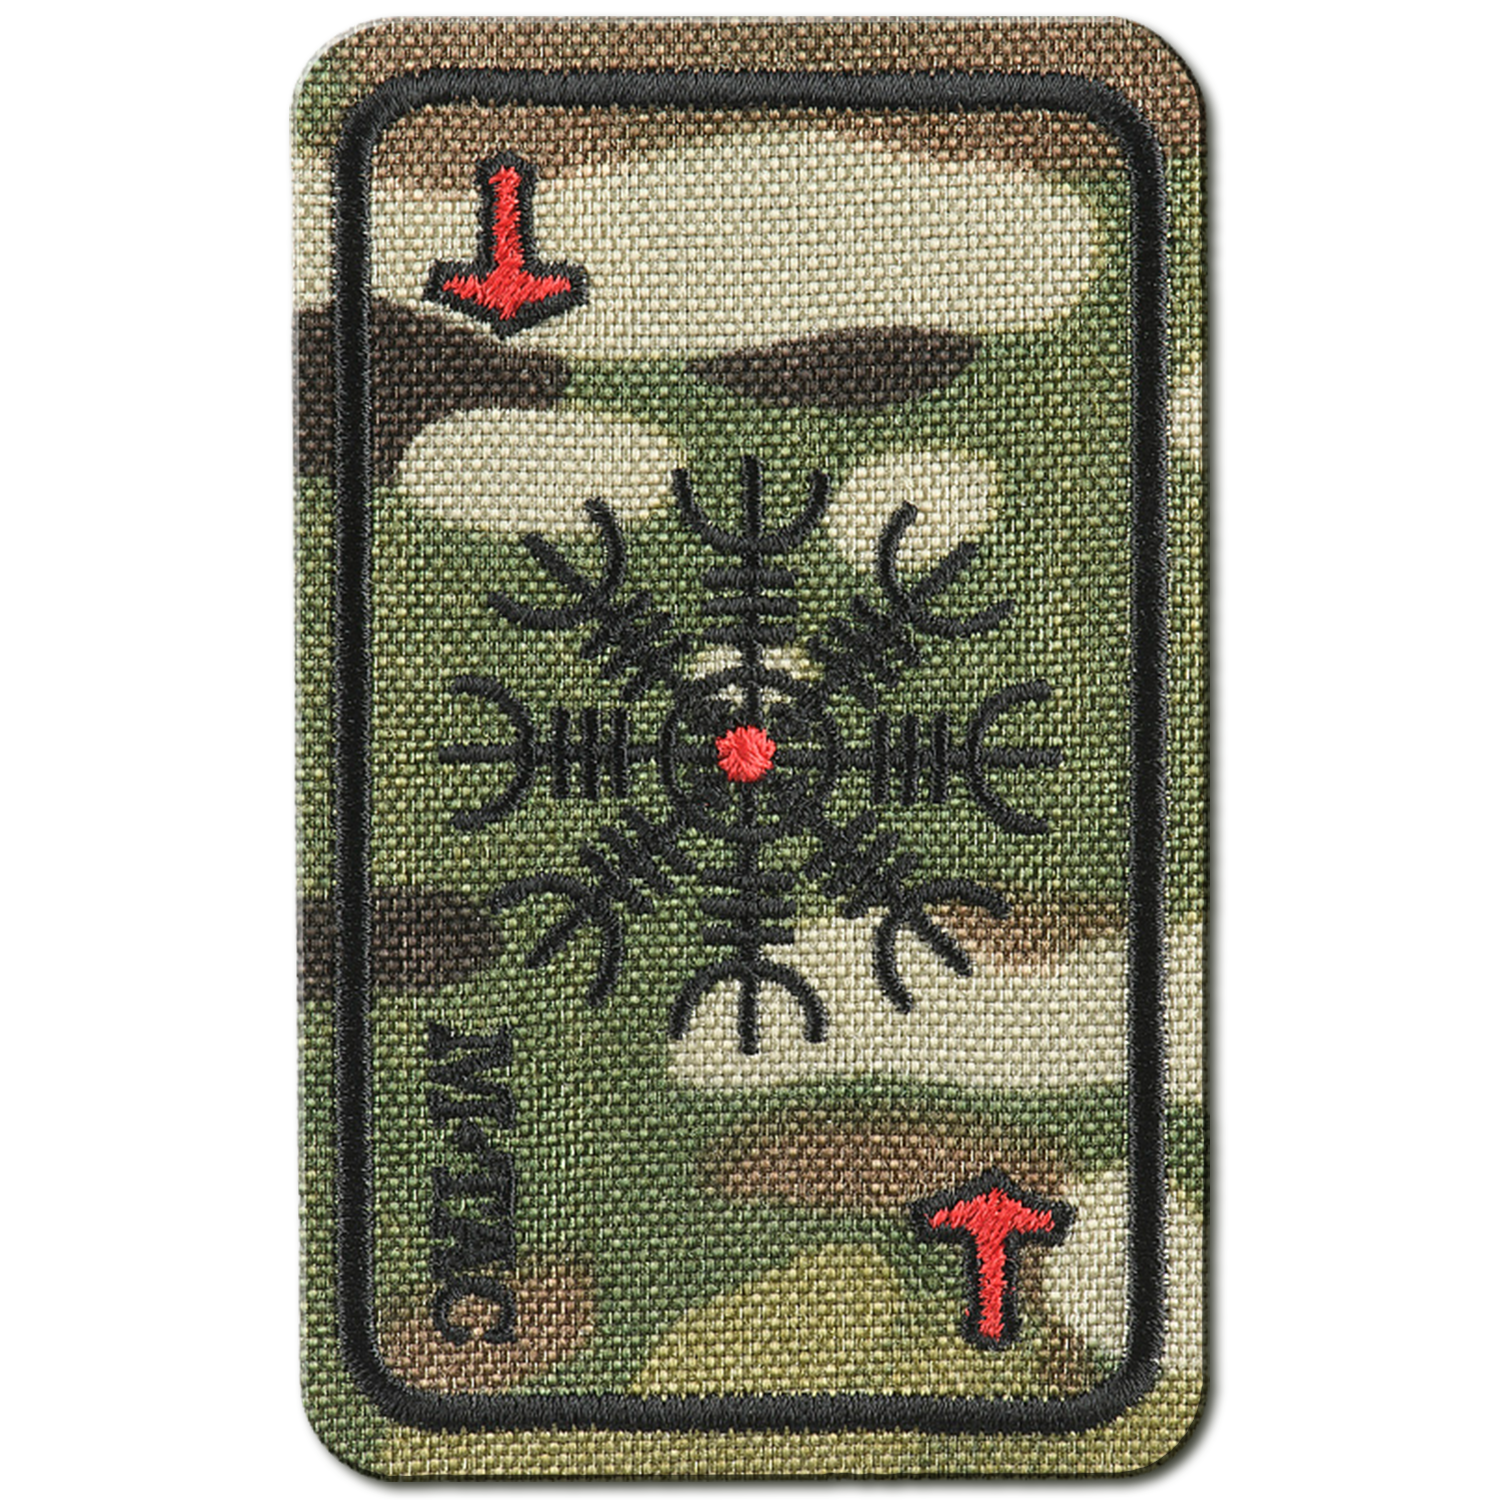 M-Tac Embroidered Patch Horror Helmet Death Card